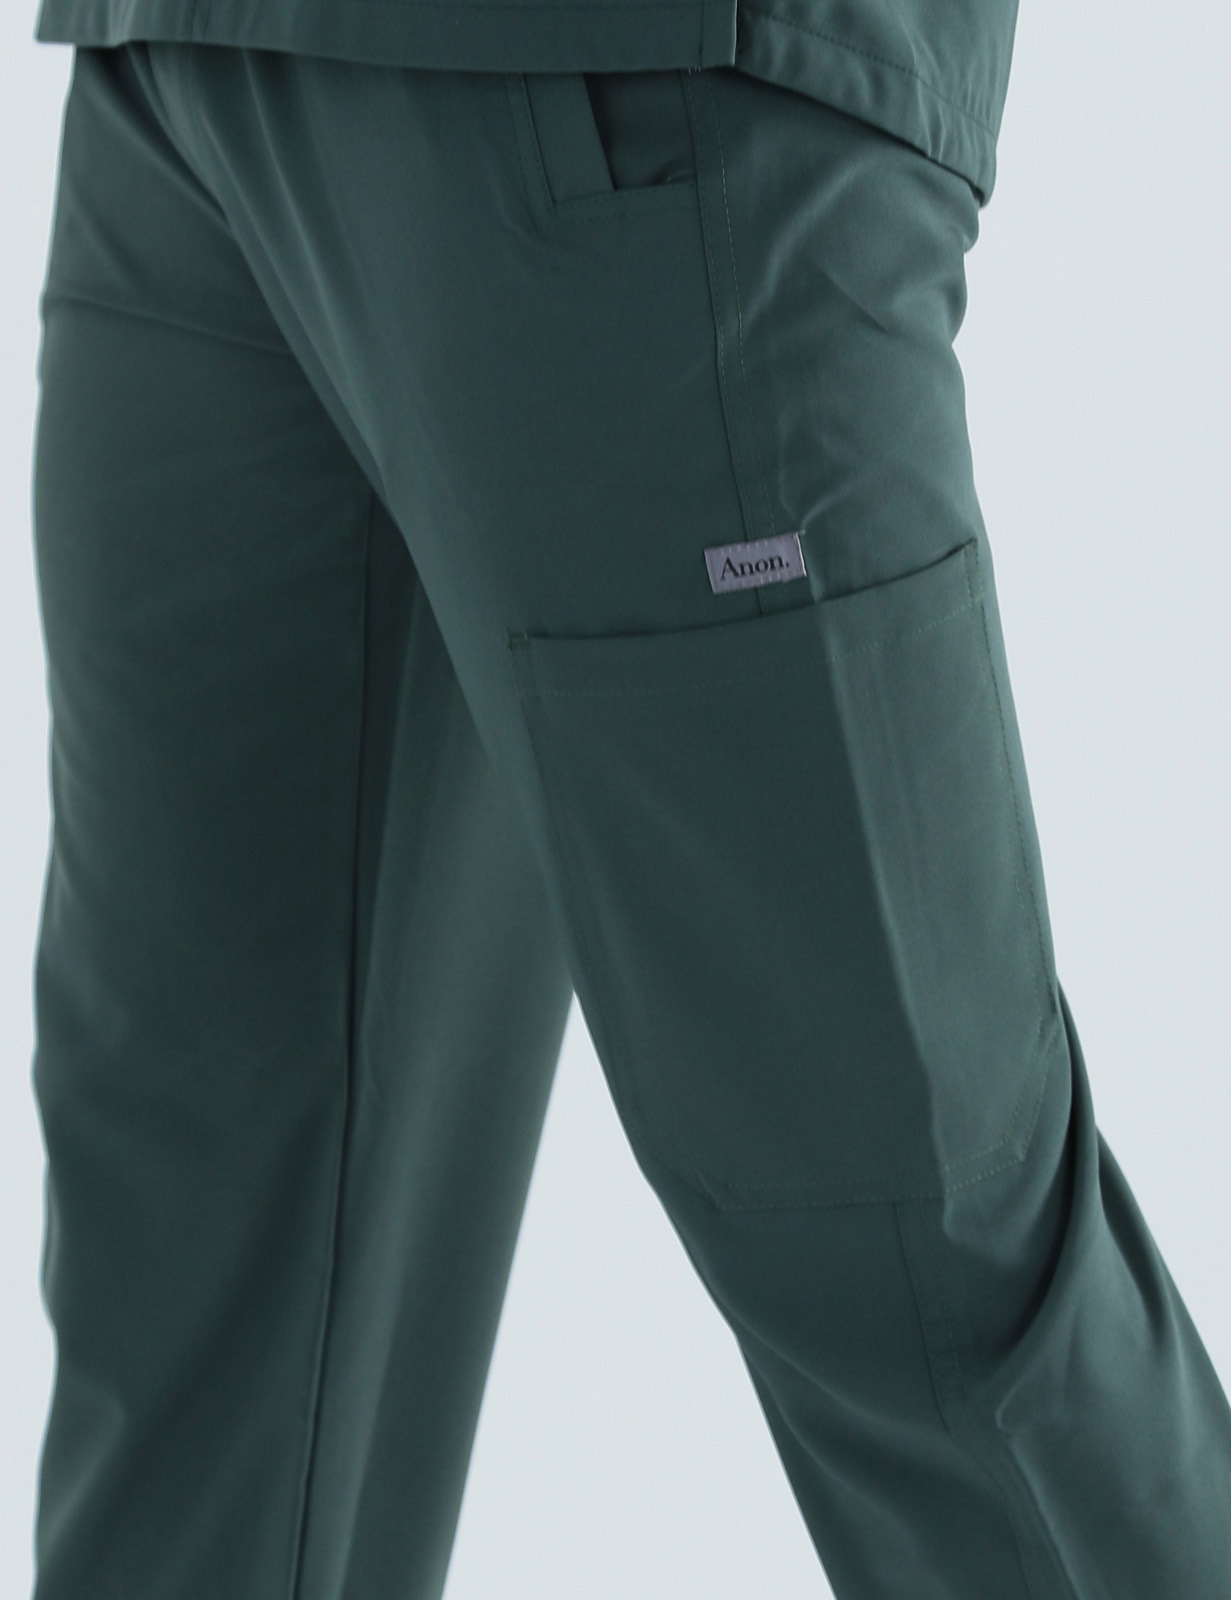 Anon Men's Scrub Pants (Stealth Collection) Poly/Spandex - Forest Green